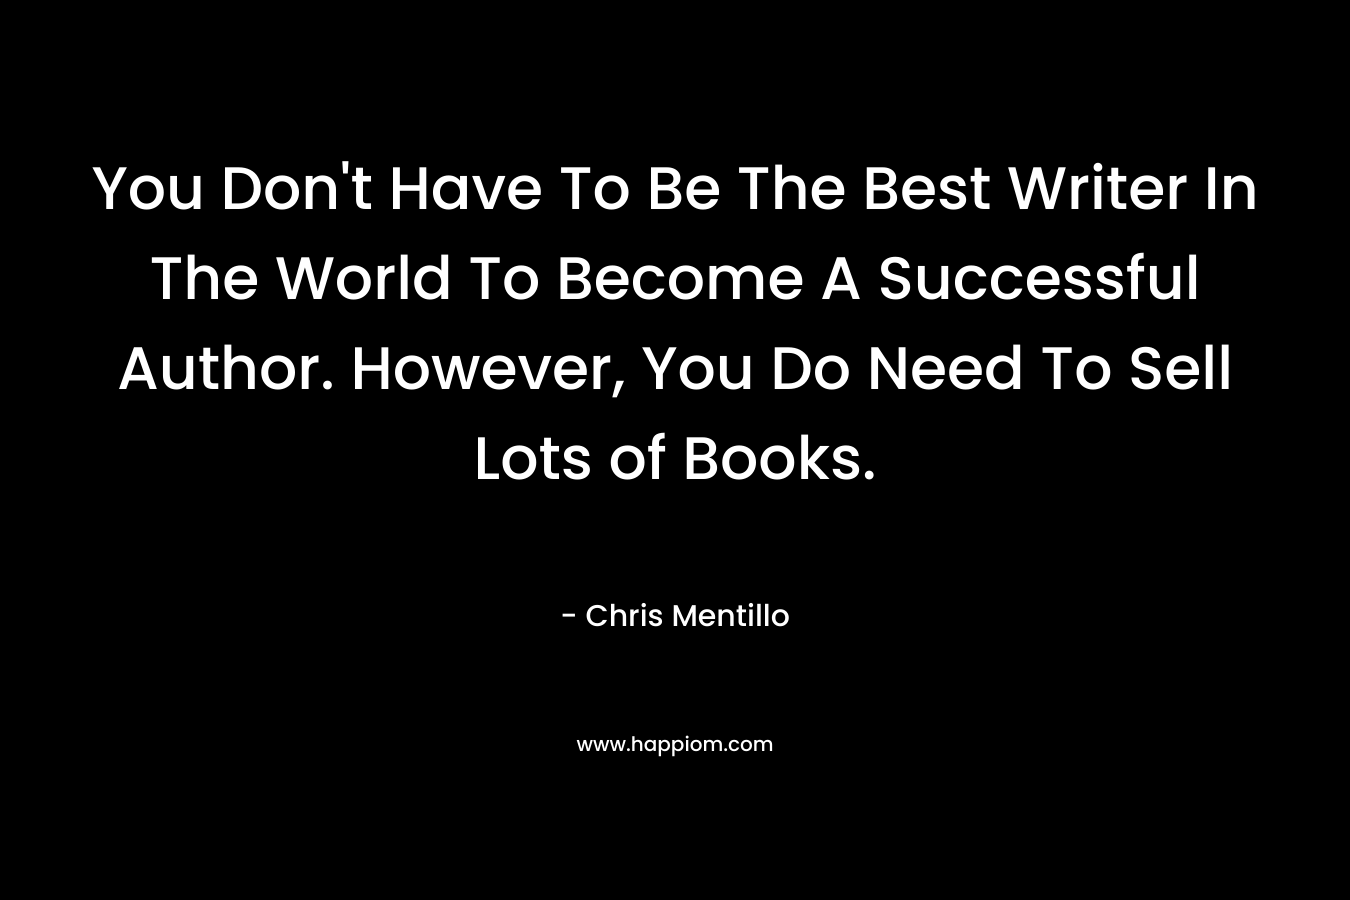 You Don't Have To Be The Best Writer In The World To Become A Successful Author. However, You Do Need To Sell Lots of Books.